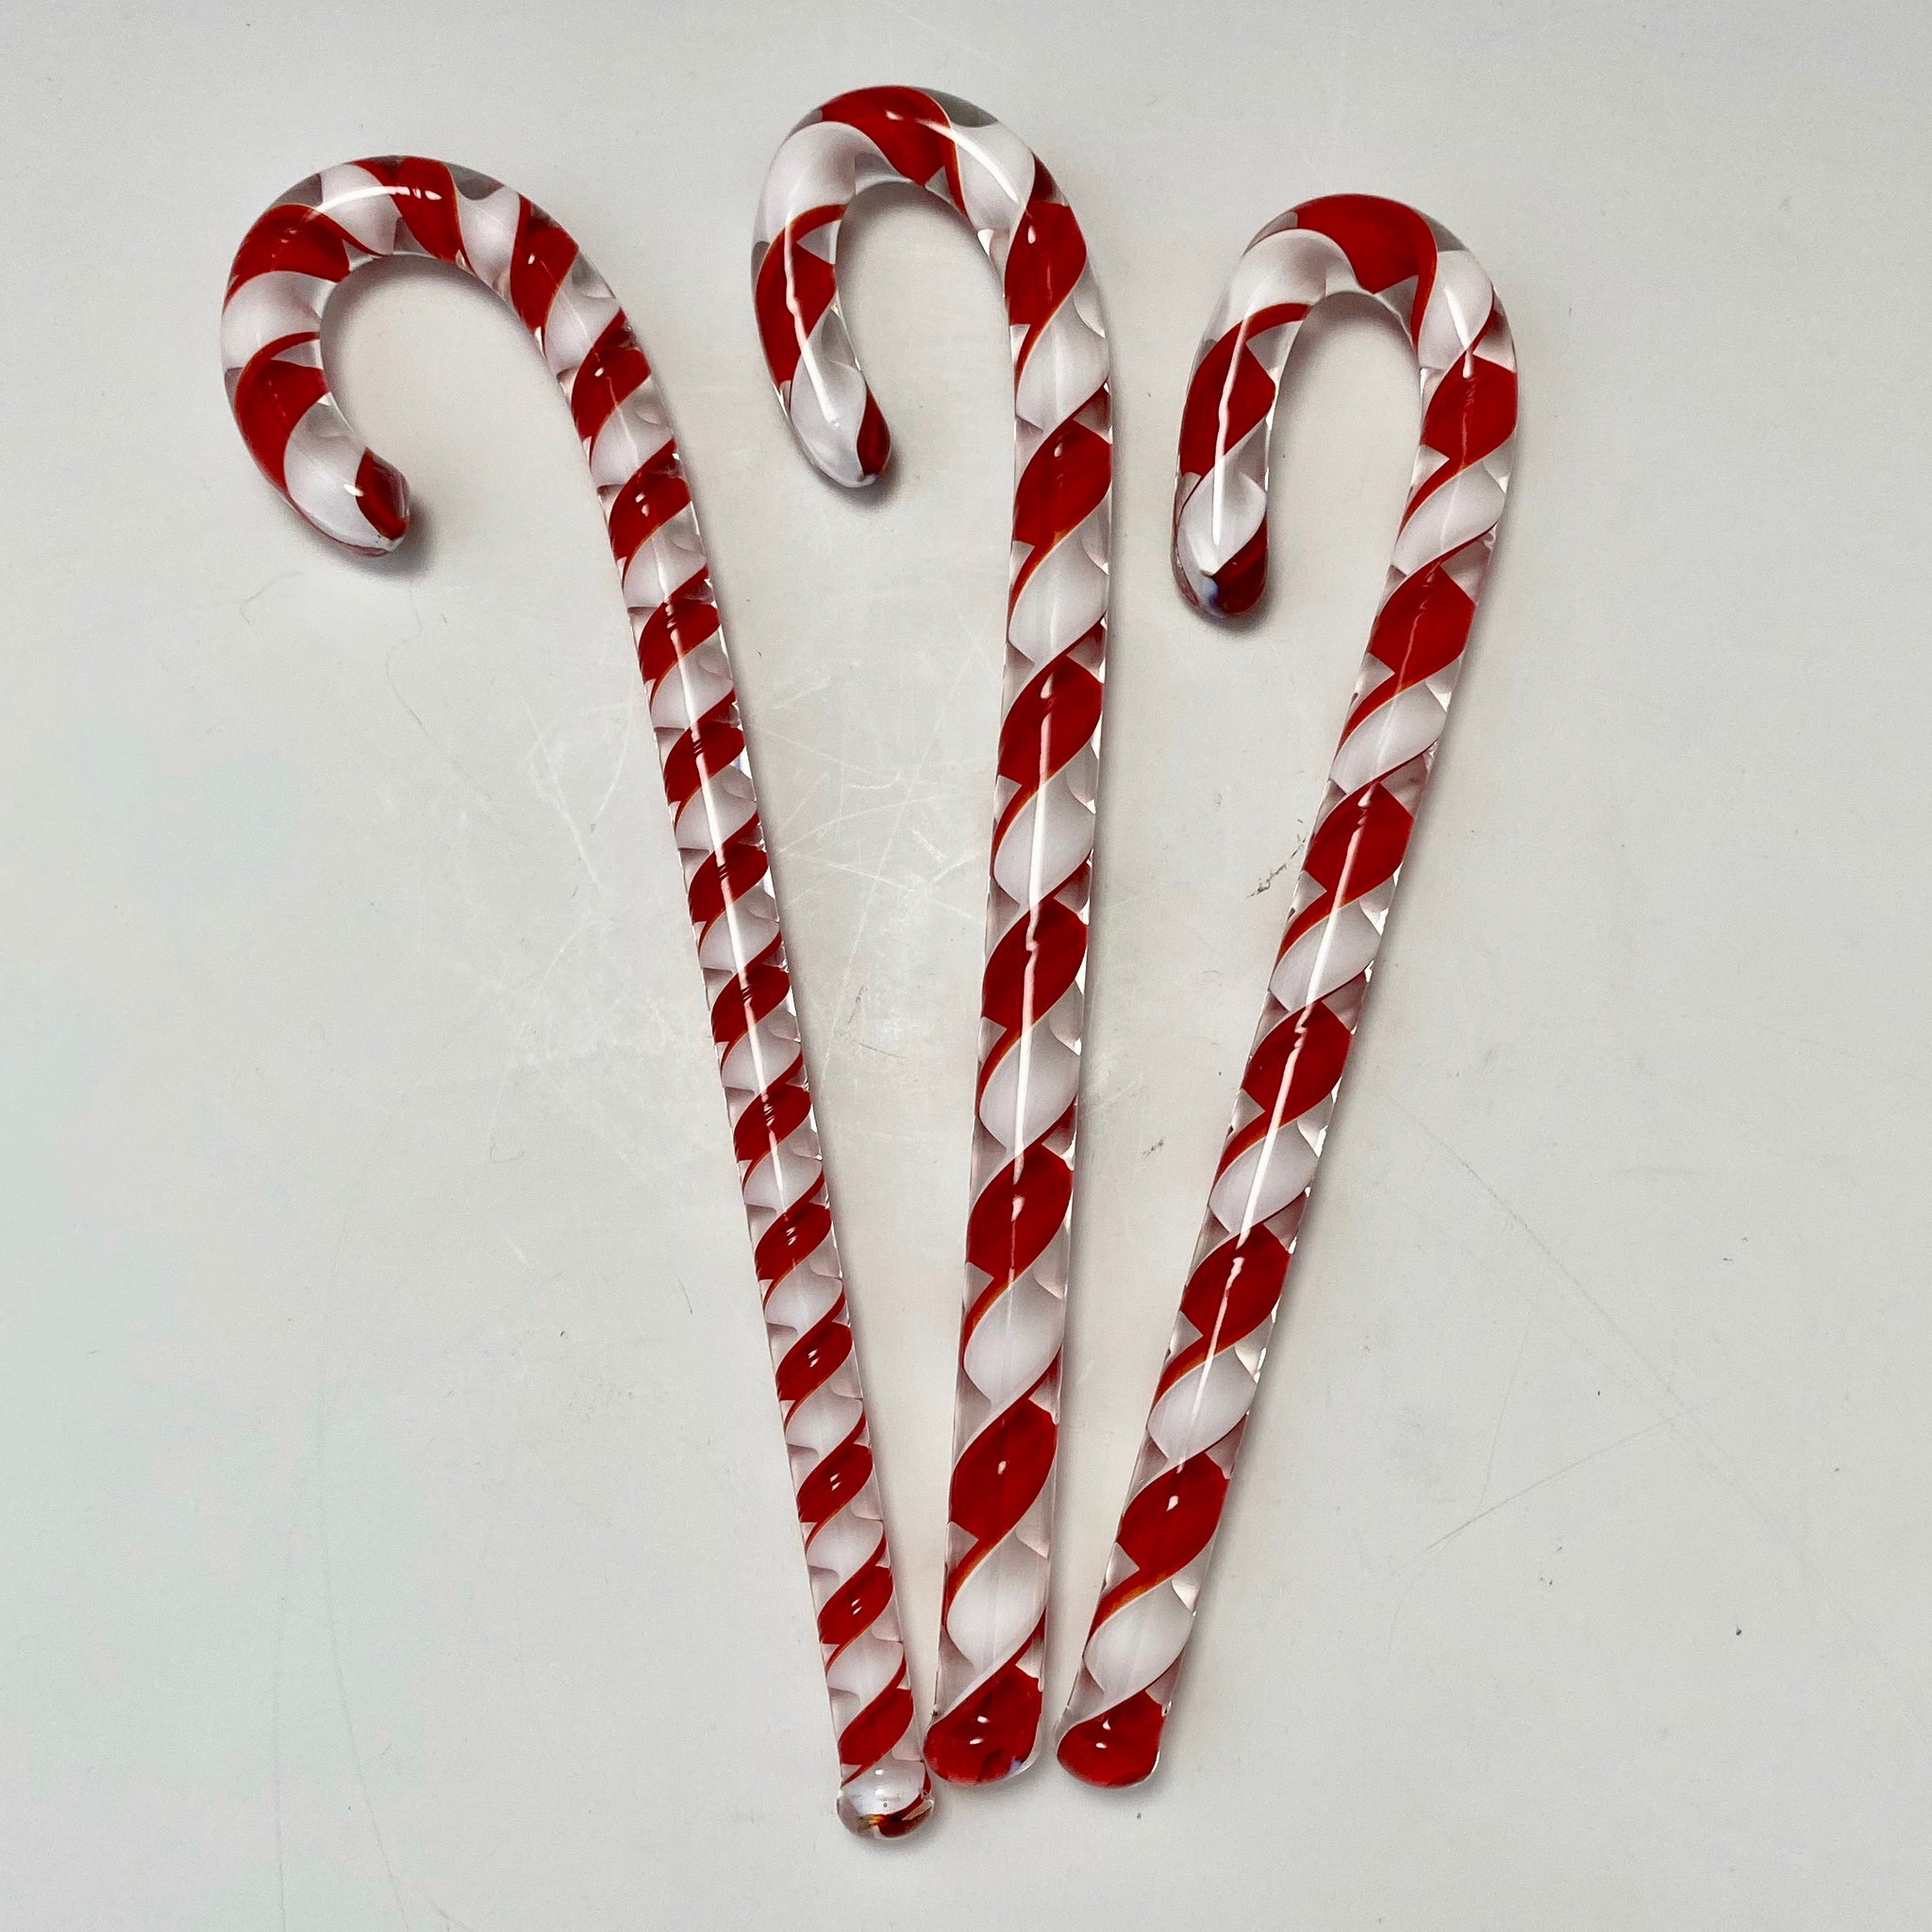 blown glass candy cane, 7.5”